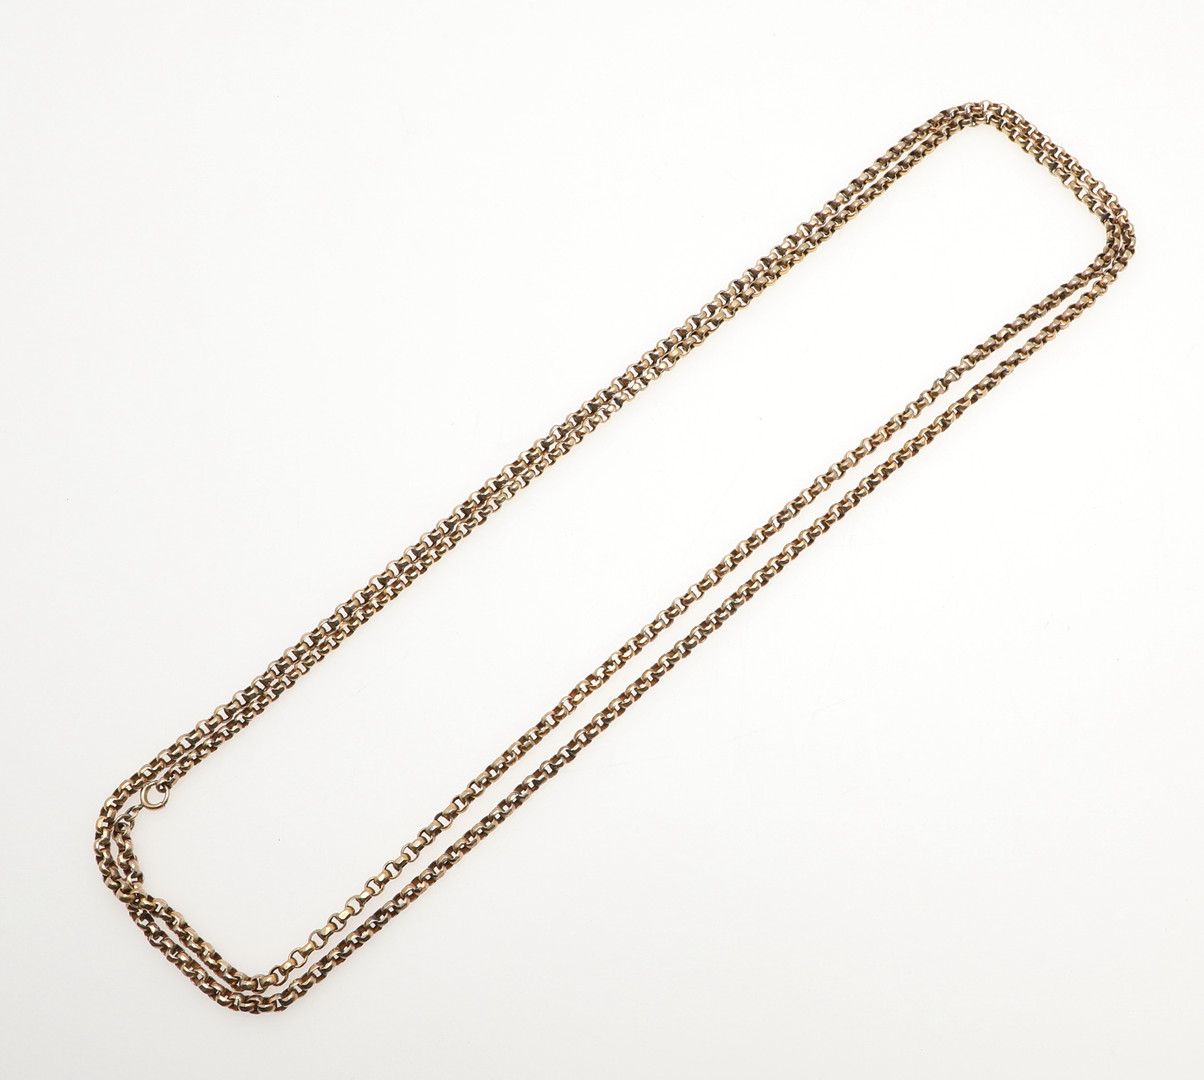 A 9CT GOLD LONG GUARD CHAIN. - Image 2 of 2